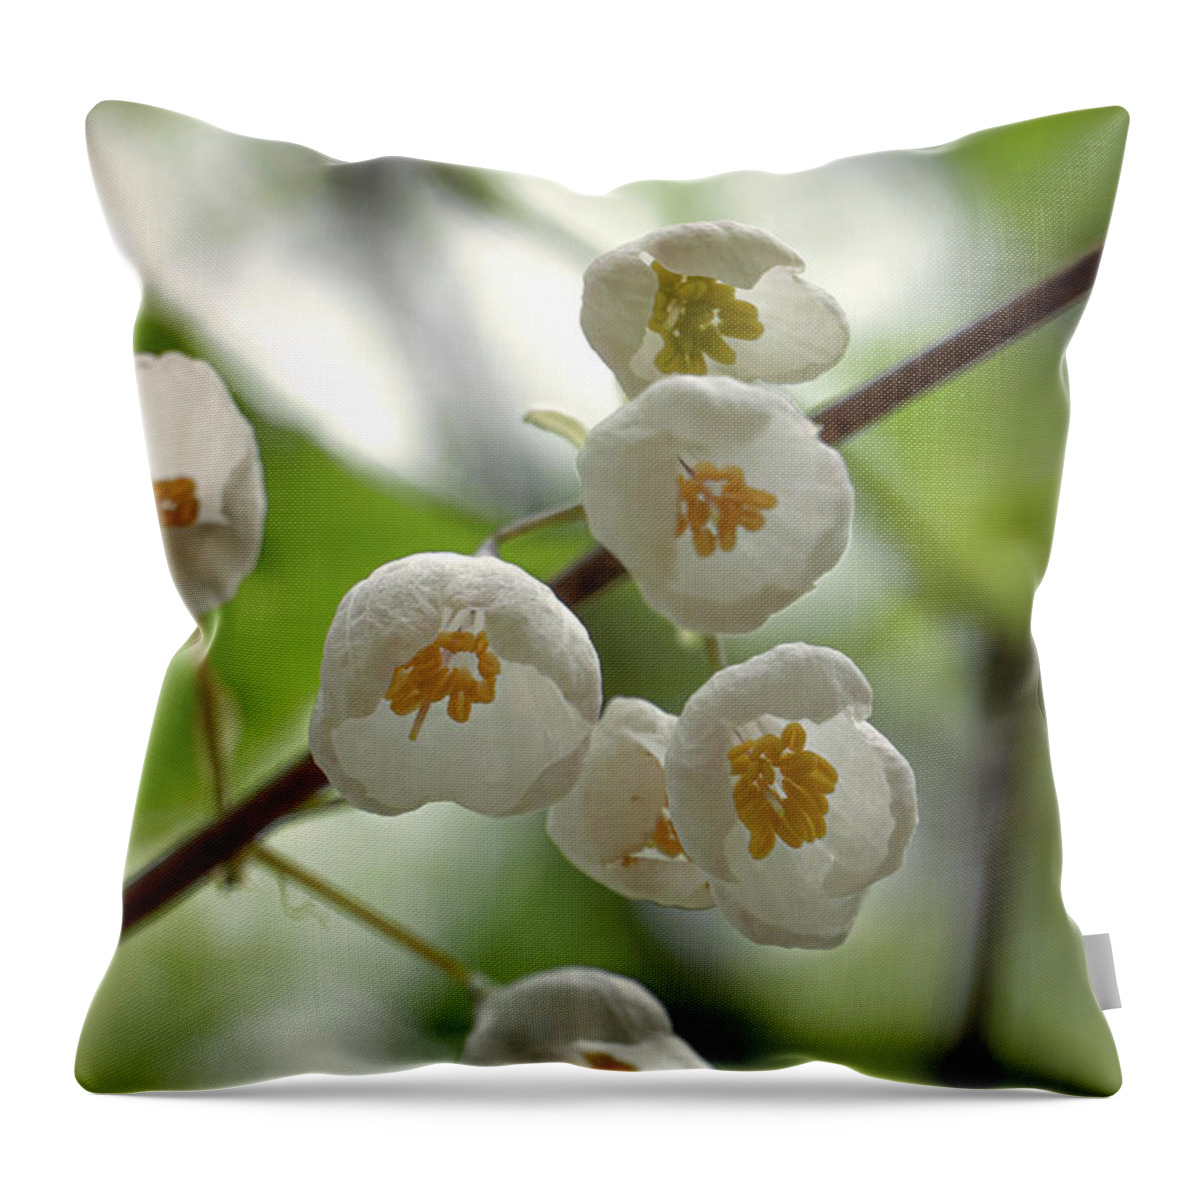 Amicalola Falls Throw Pillow featuring the photograph Small Blooms by David R Robinson